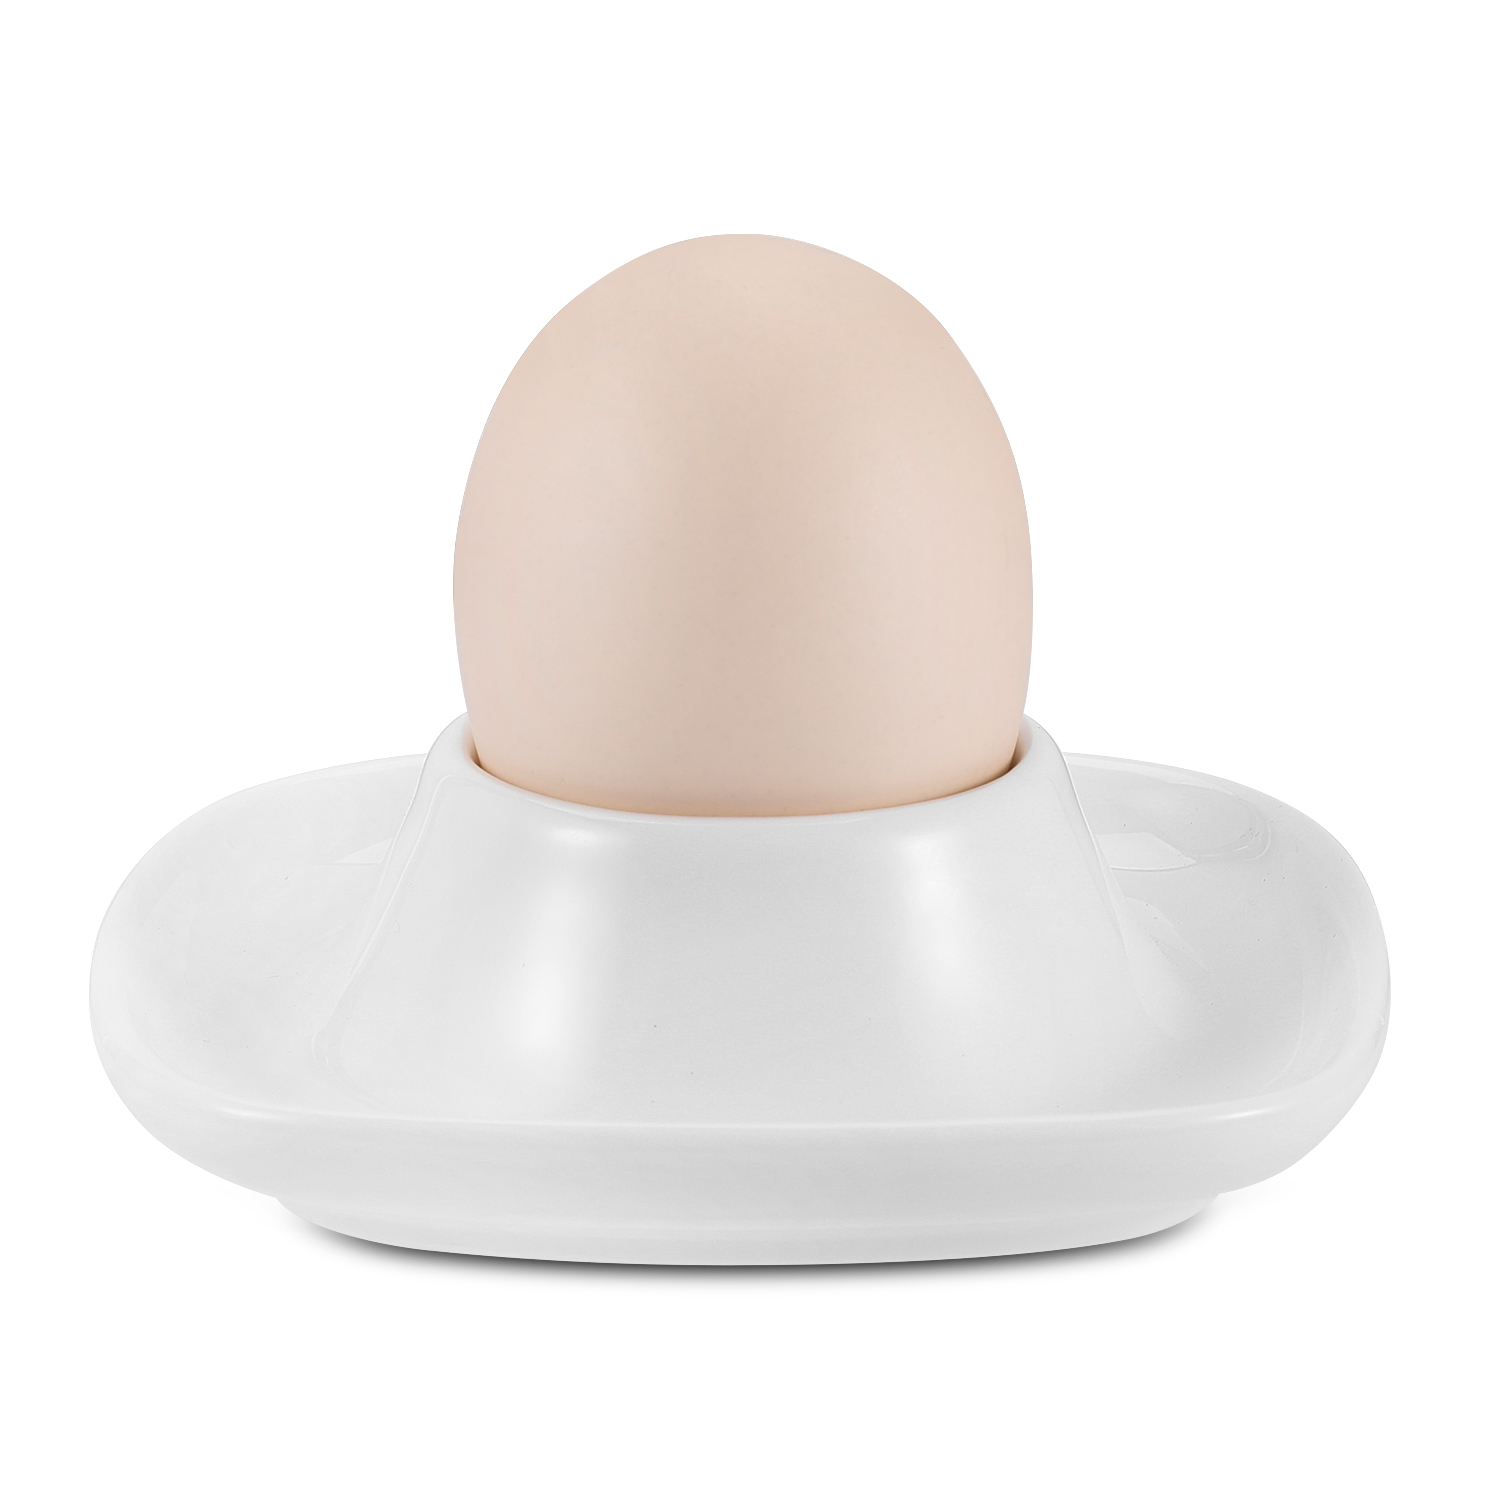 Unlike ordinary unstable stemmed egg cups, our square white porcelain egg holders are designed with a flat base for superior stability and a protruding rim for setting spoons/cutlery and putting eggshells in